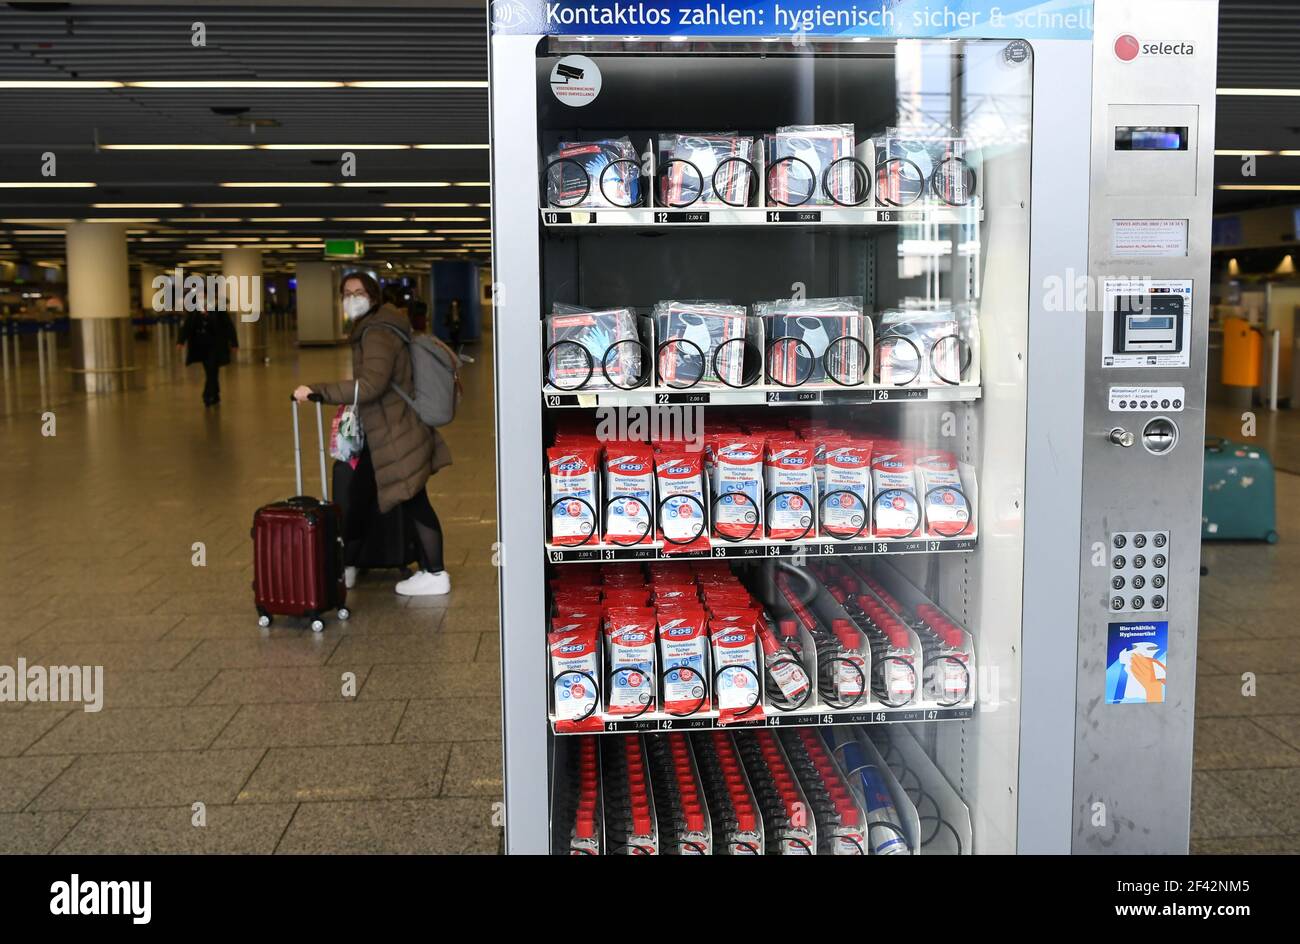 Frankfurt, Germany. 18th Mar, 2021. A vending machine selling protective and hygienic items is seen at an international airport in Frankfurt, Germany, on March 18, 2021. Daily COVID-19 infections in Germany continued to rise sharply as the country registered 17,504 cases within one day, the Robert Koch Institute (RKI) announced on Thursday. Credit: Lu Yang/Xinhua/Alamy Live News Stock Photo